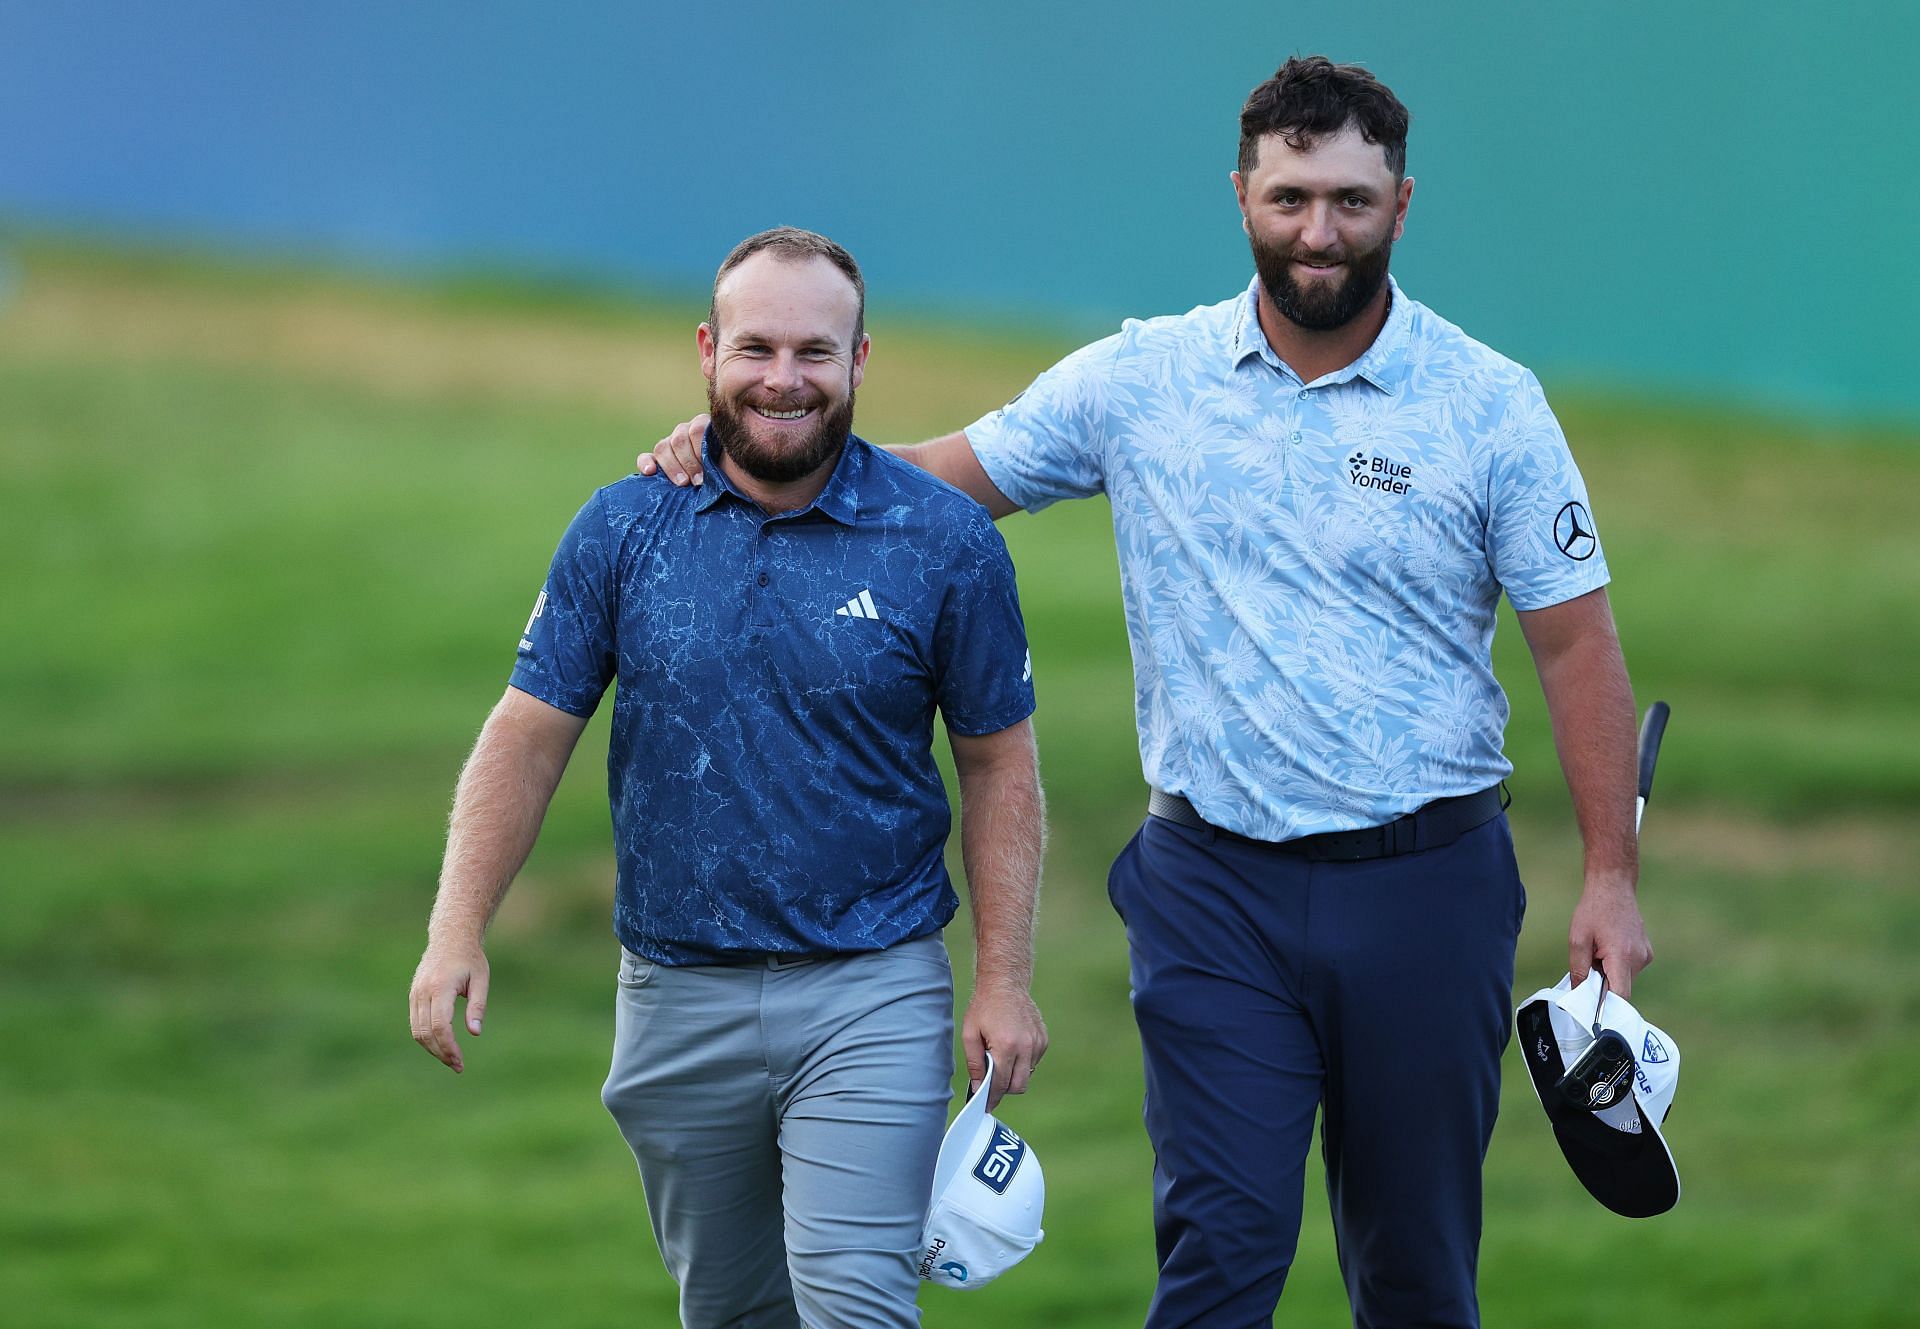 Tyrrell Hatton of England and Jon Rahm of Spain (Photo by Andrew Redington/Getty Images)